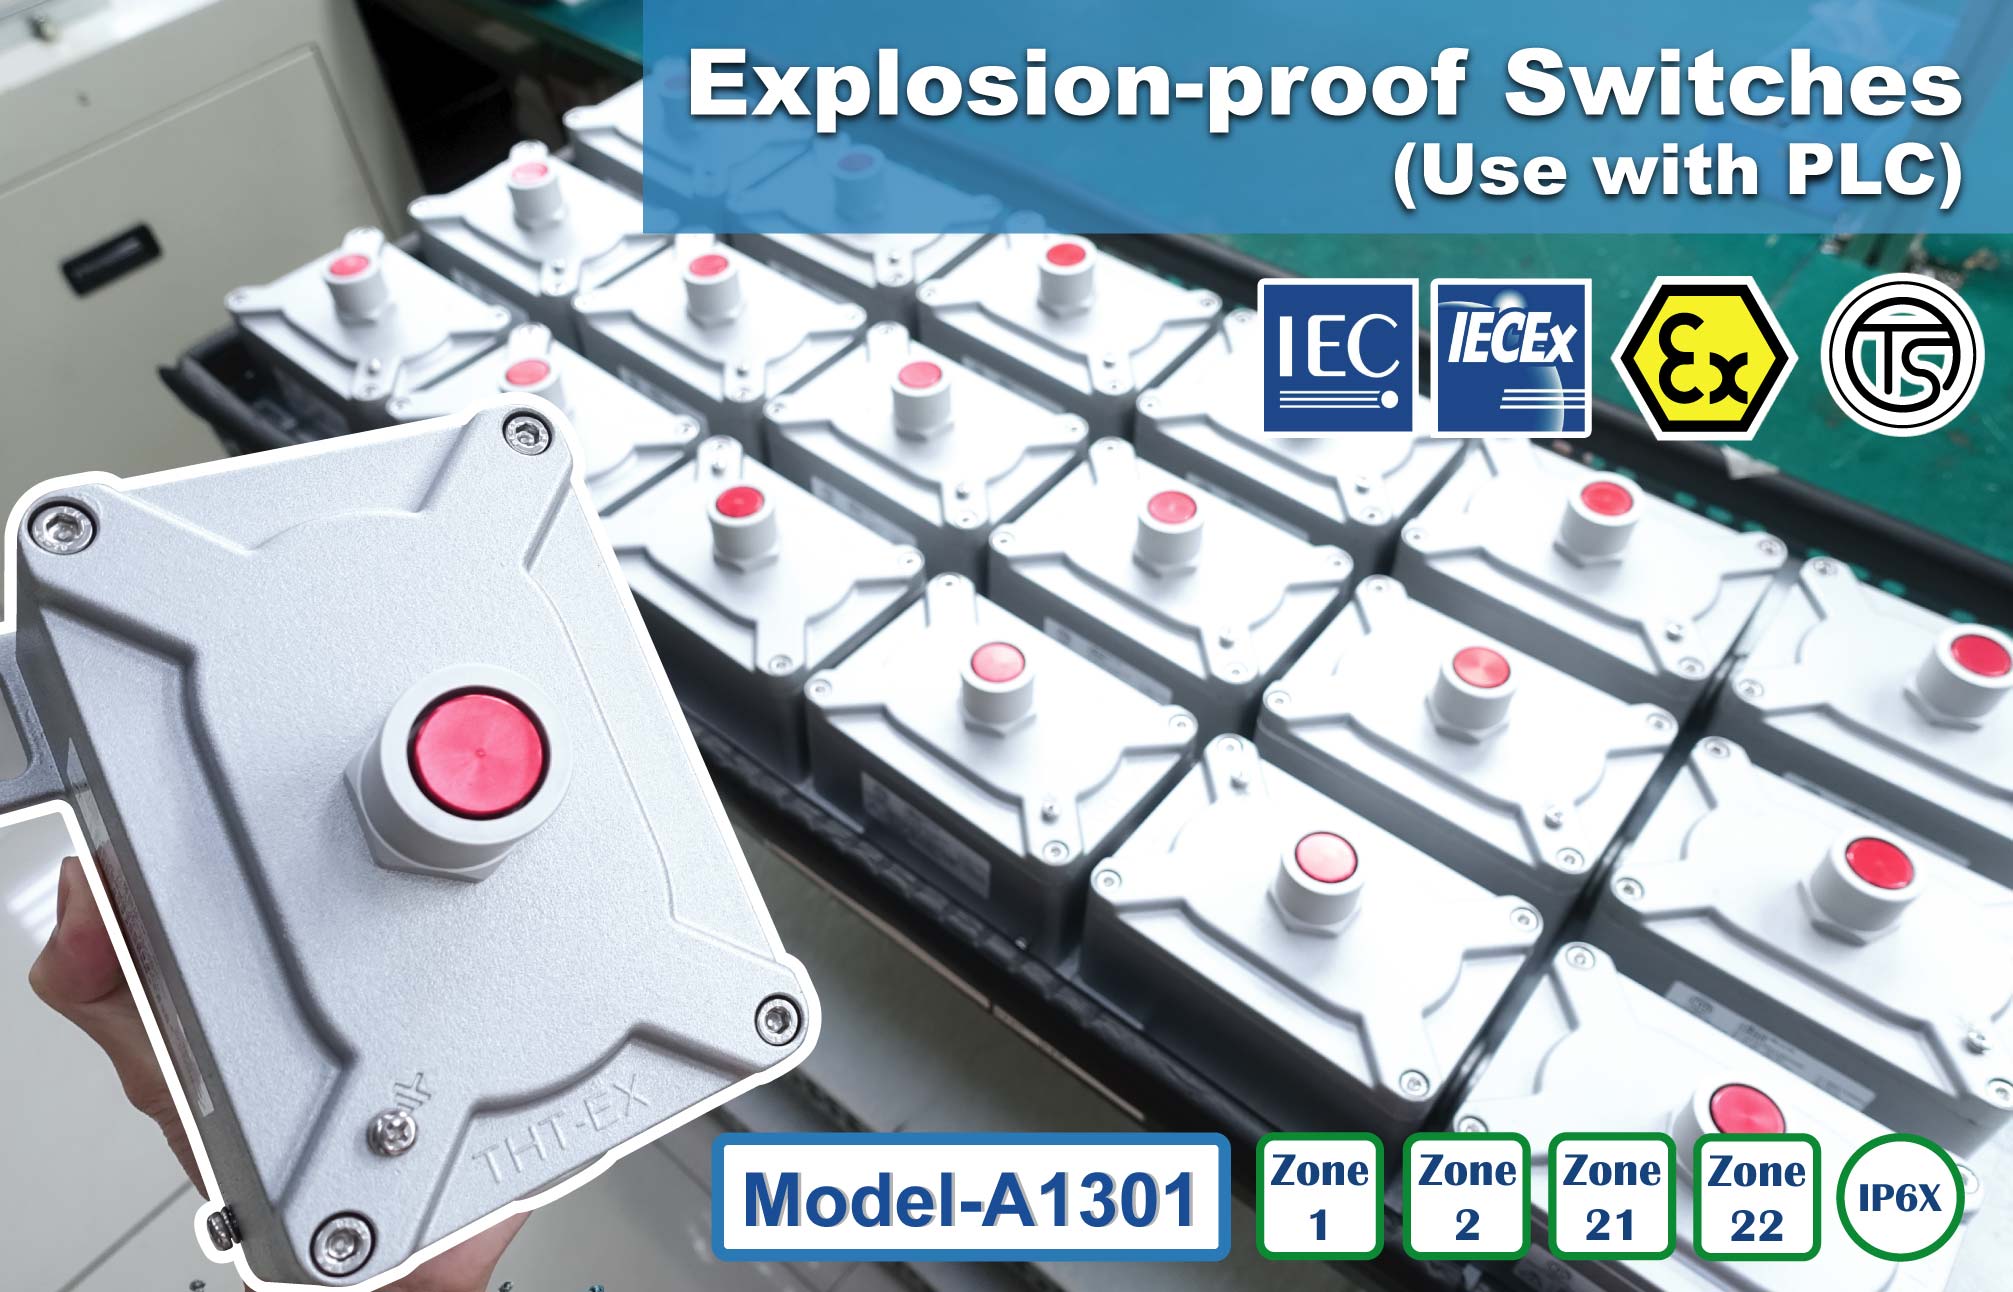 Explosion-proof Switch A1301: Safe & Durable Housing with Automatic Power-off Protection!